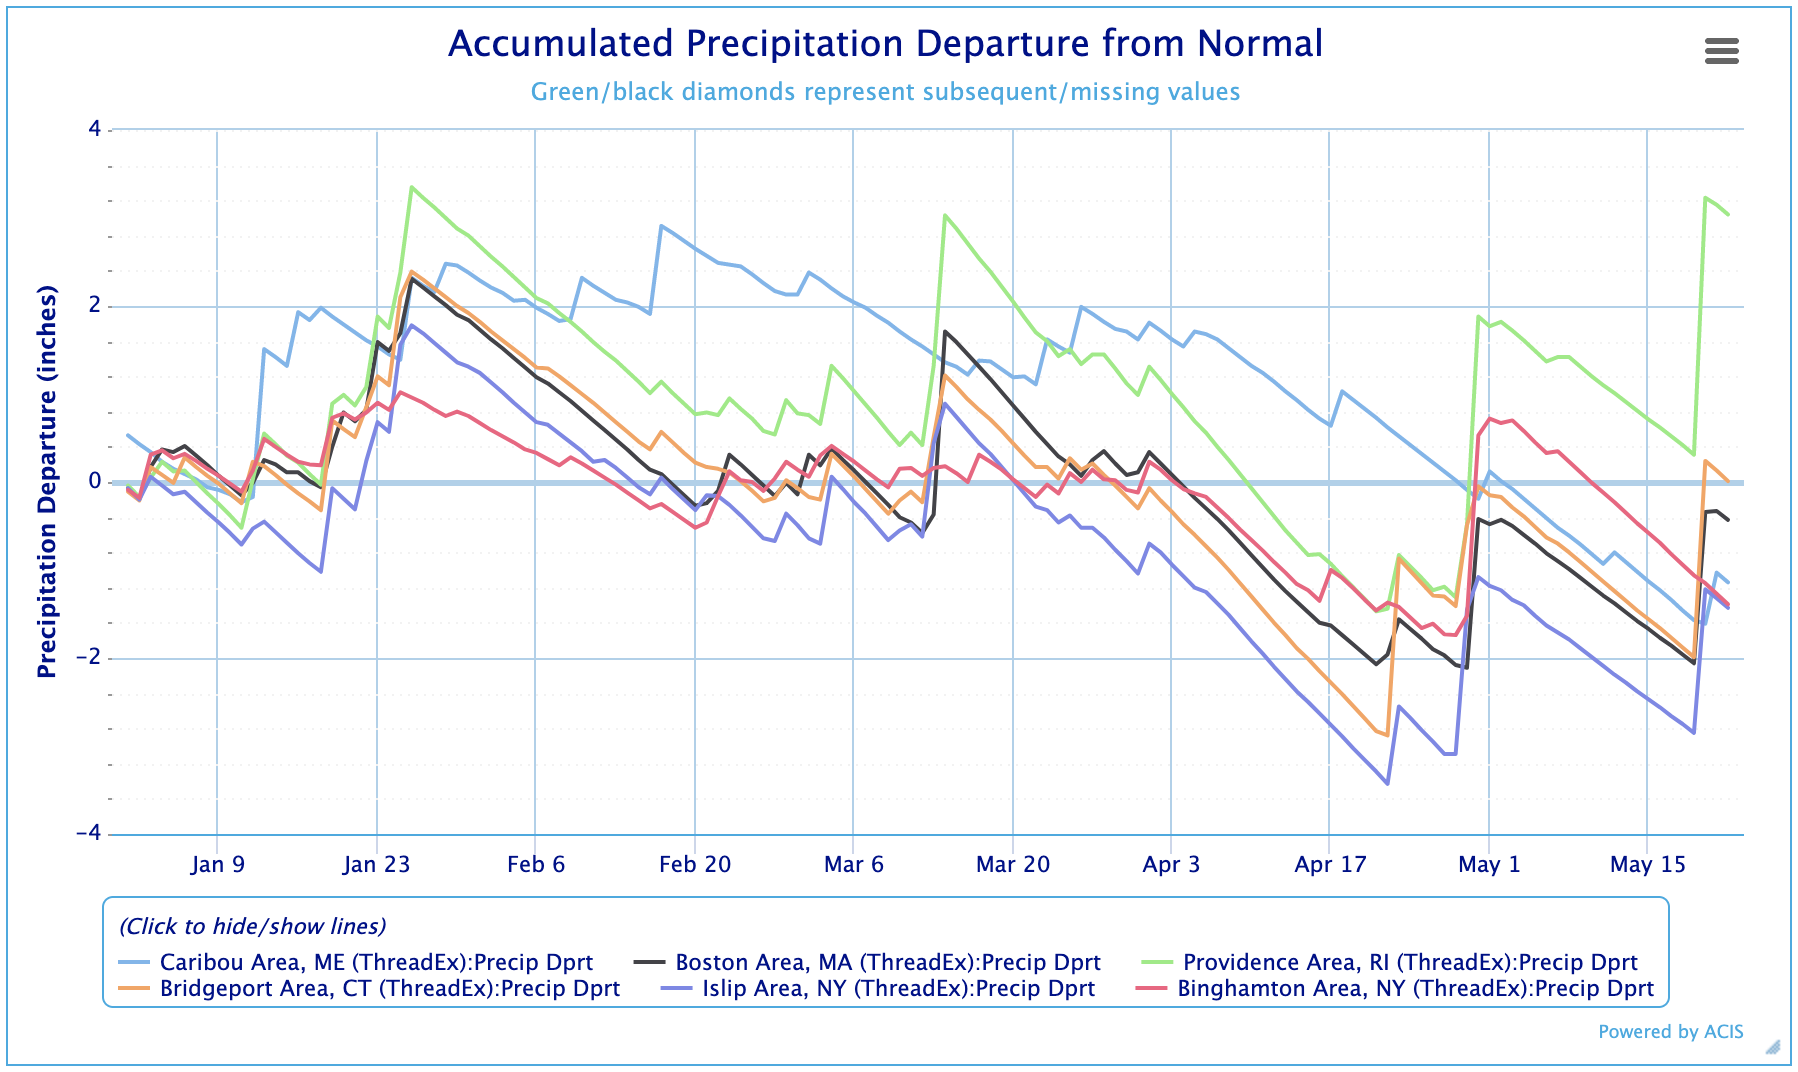 Locations across the Northeast have seen an increase in precipitation recently, though several sites are still showing a deficit for the calendar year to date.